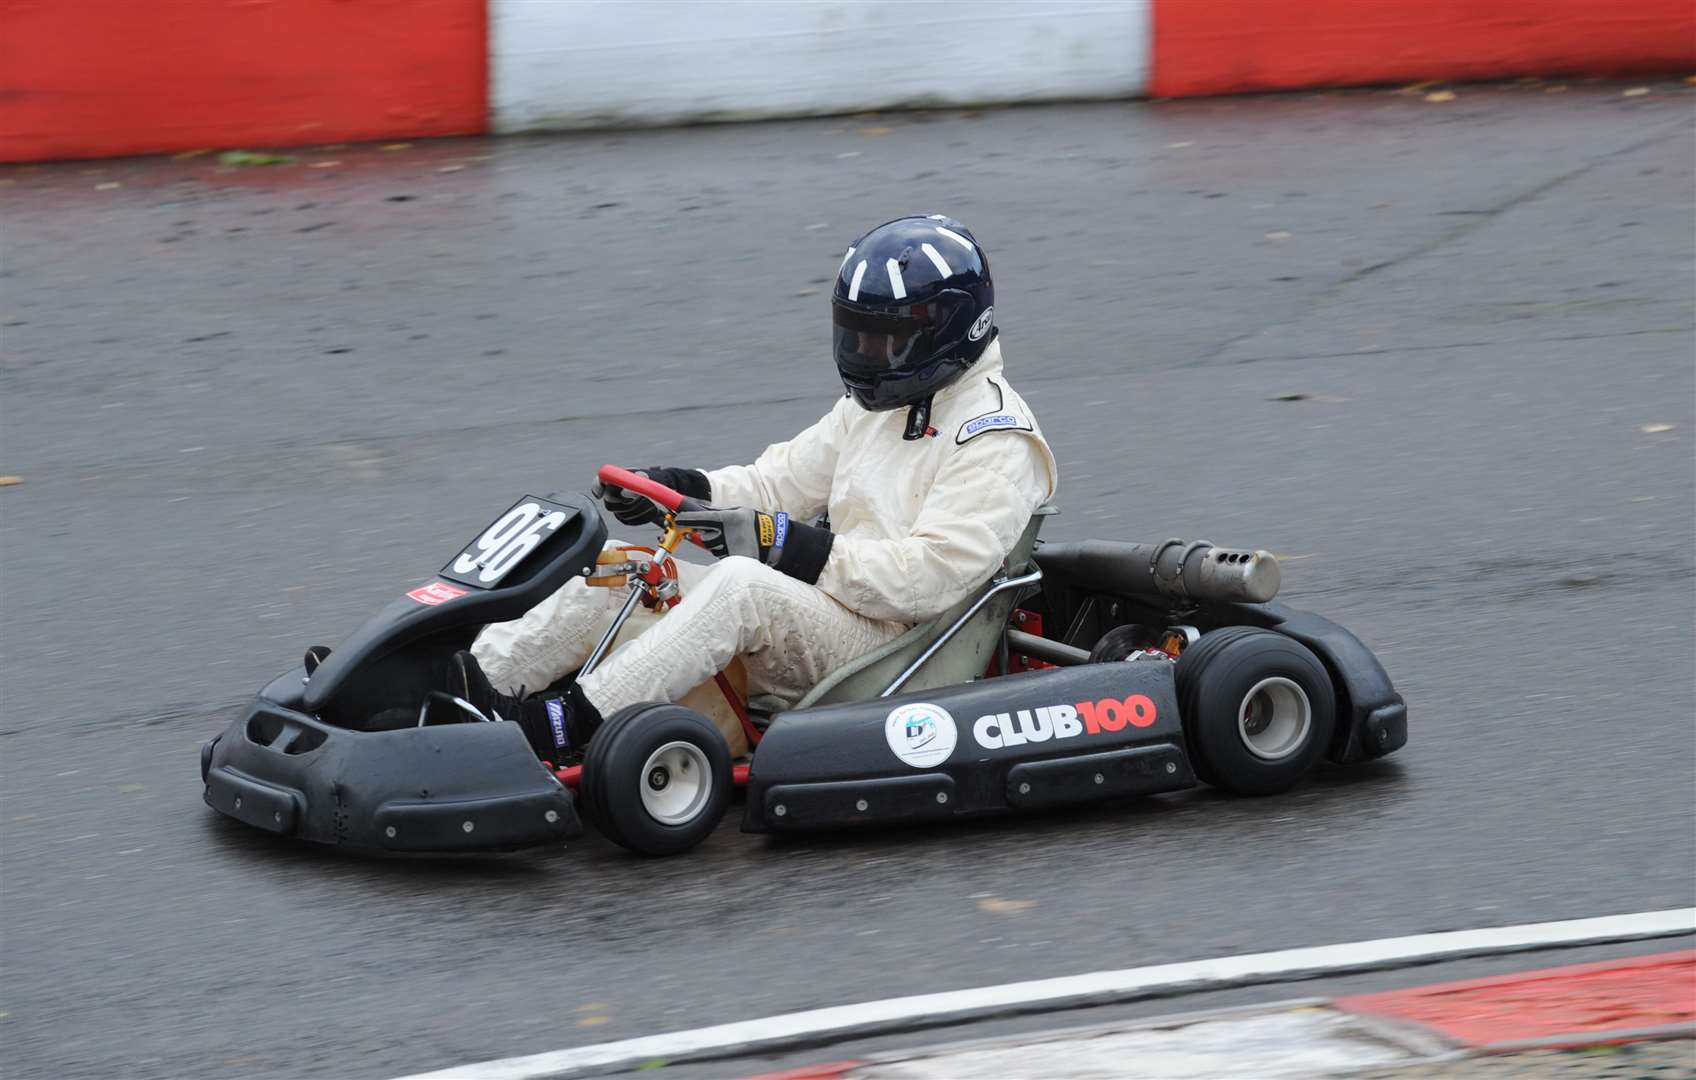 Damon Hill opened the 2013 Henry Surtees Challenge by taking to the drying track in one of the Club100 karts. Picture: Simon Hildrew